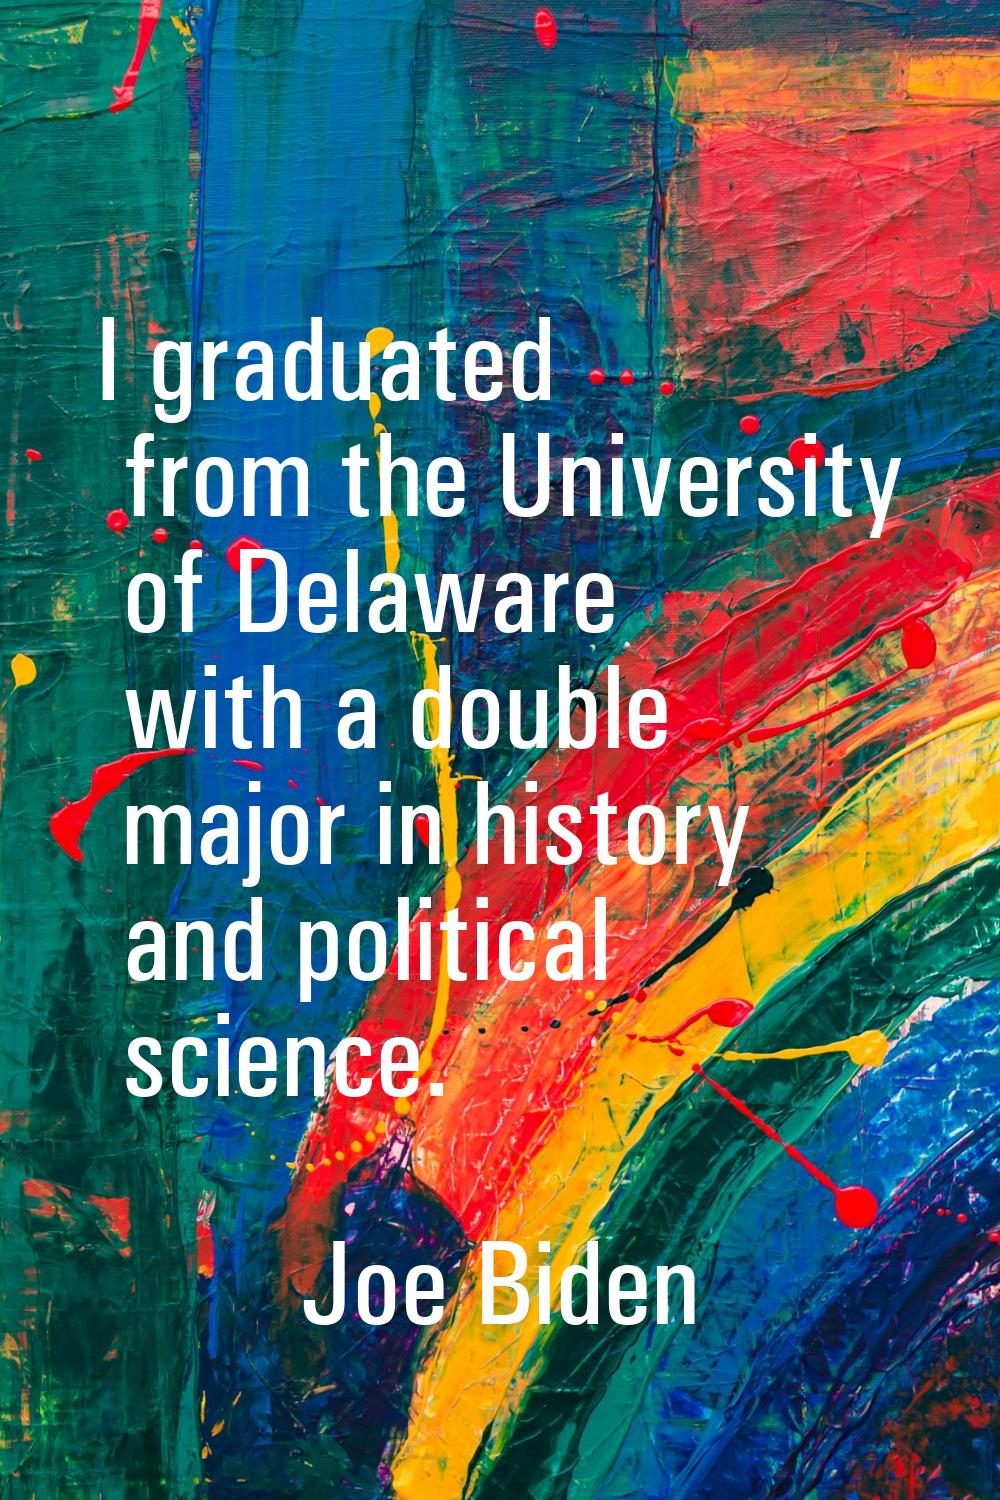 I graduated from the University of Delaware with a double major in history and political science.